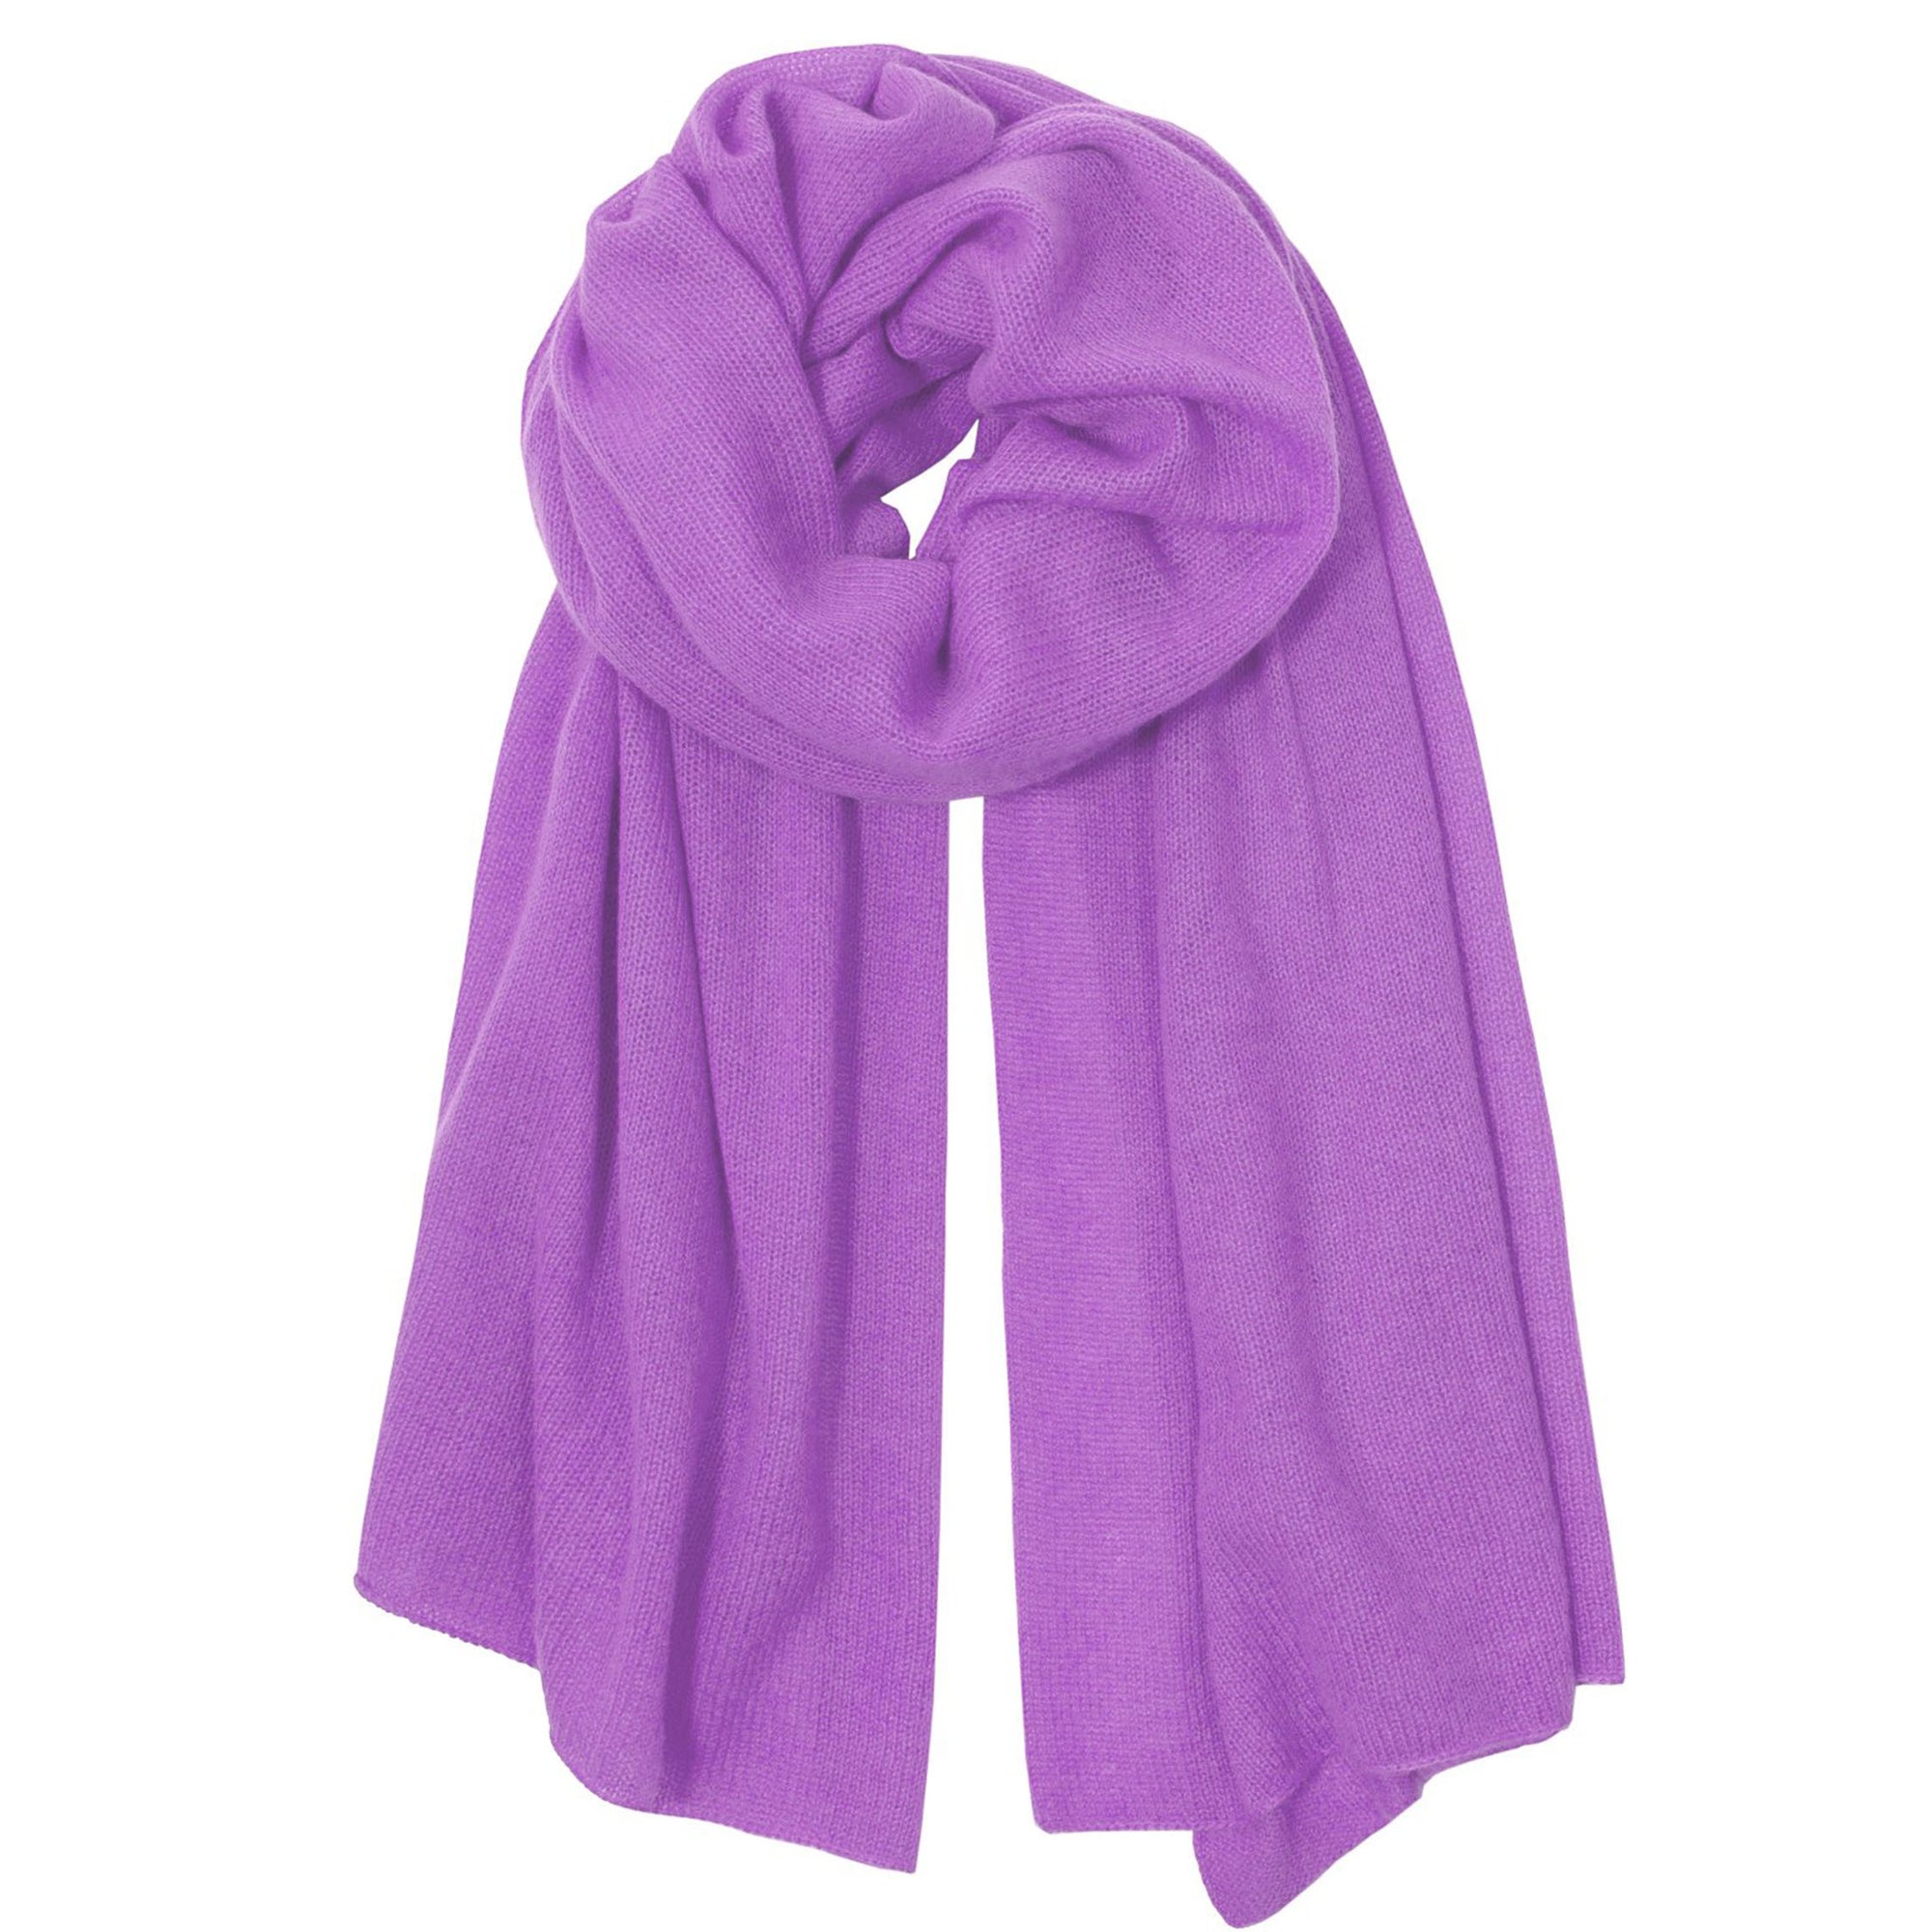 PETITE CALIN Kaschmirschal, Cashmere scarf, Lila, Flieder, Sustainable cashmere, Kaschmir, Mütze, Handmade, Zero waste, Fair trade, Organic, Handcrafted, Handmade, Made in Europe, Made in Germany, Female Empowerment, Shop now - the wearness online-shop - ETHICAL & SUSTAINABLE LUXURY FASHION 